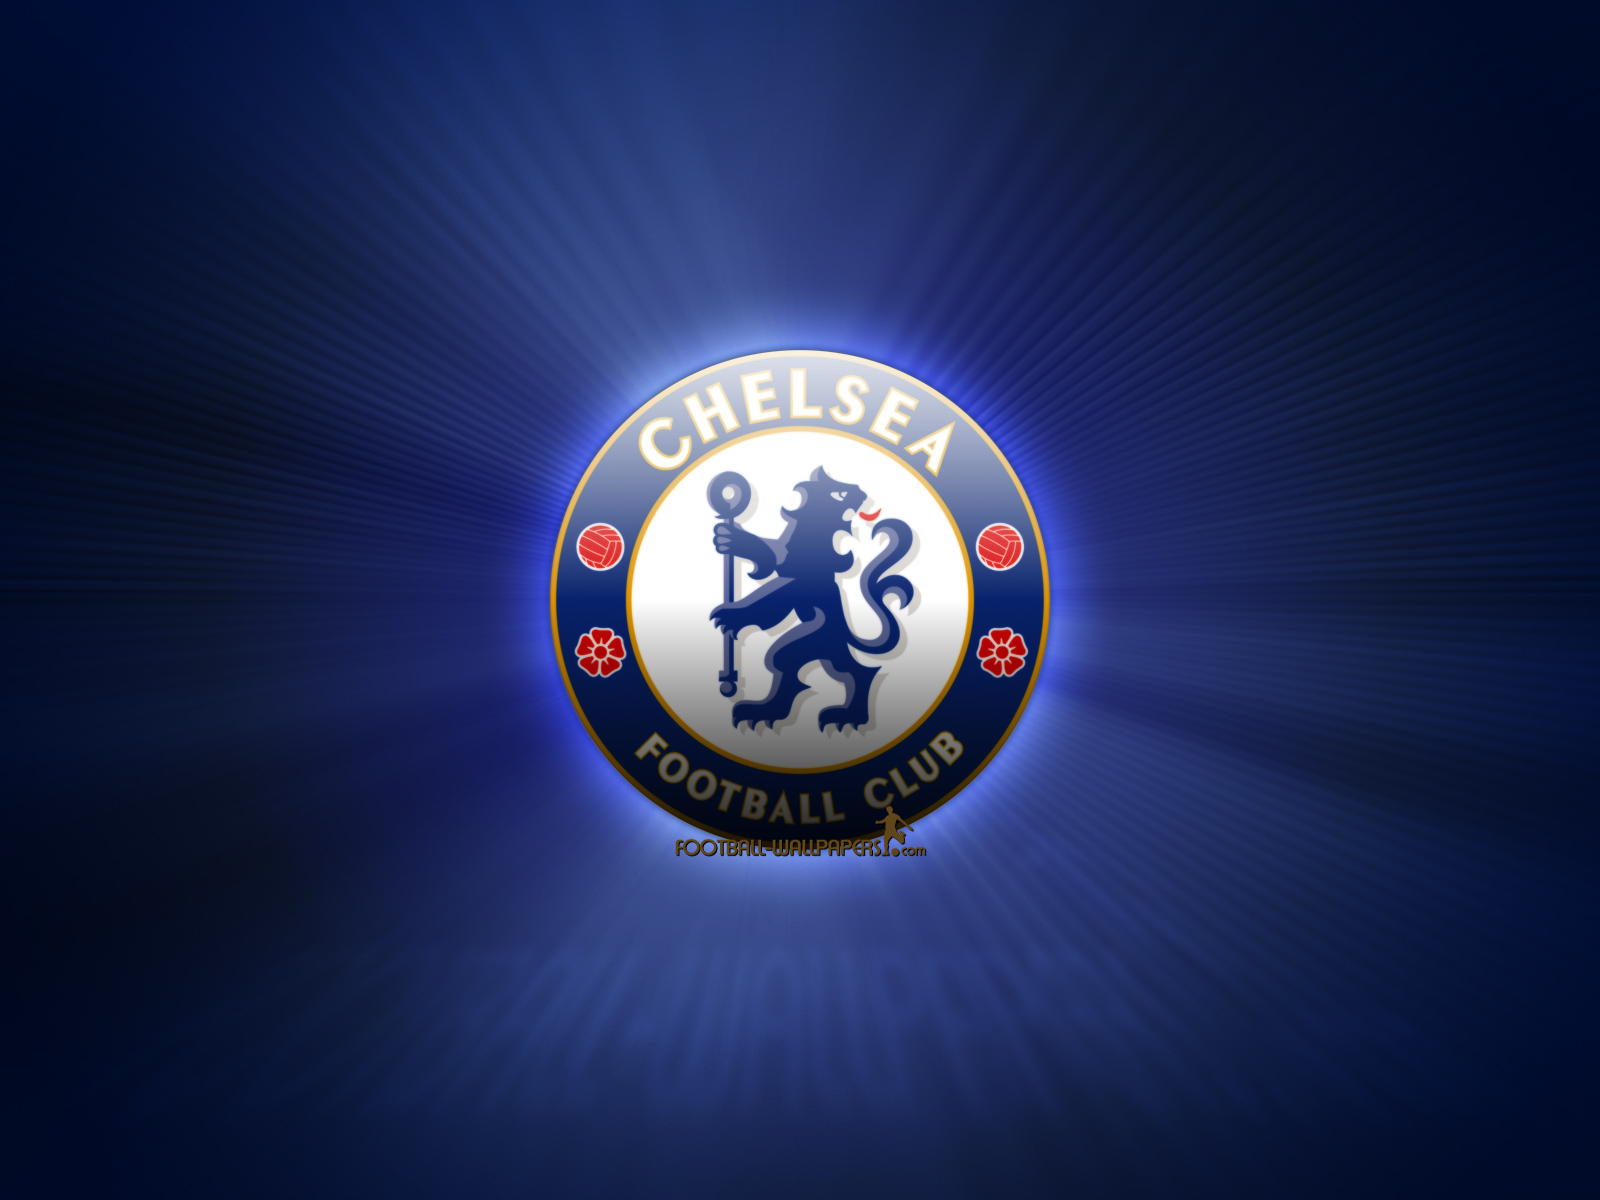 Chelsea Mascot Is A Lion Taken From Their Club Logos And Named